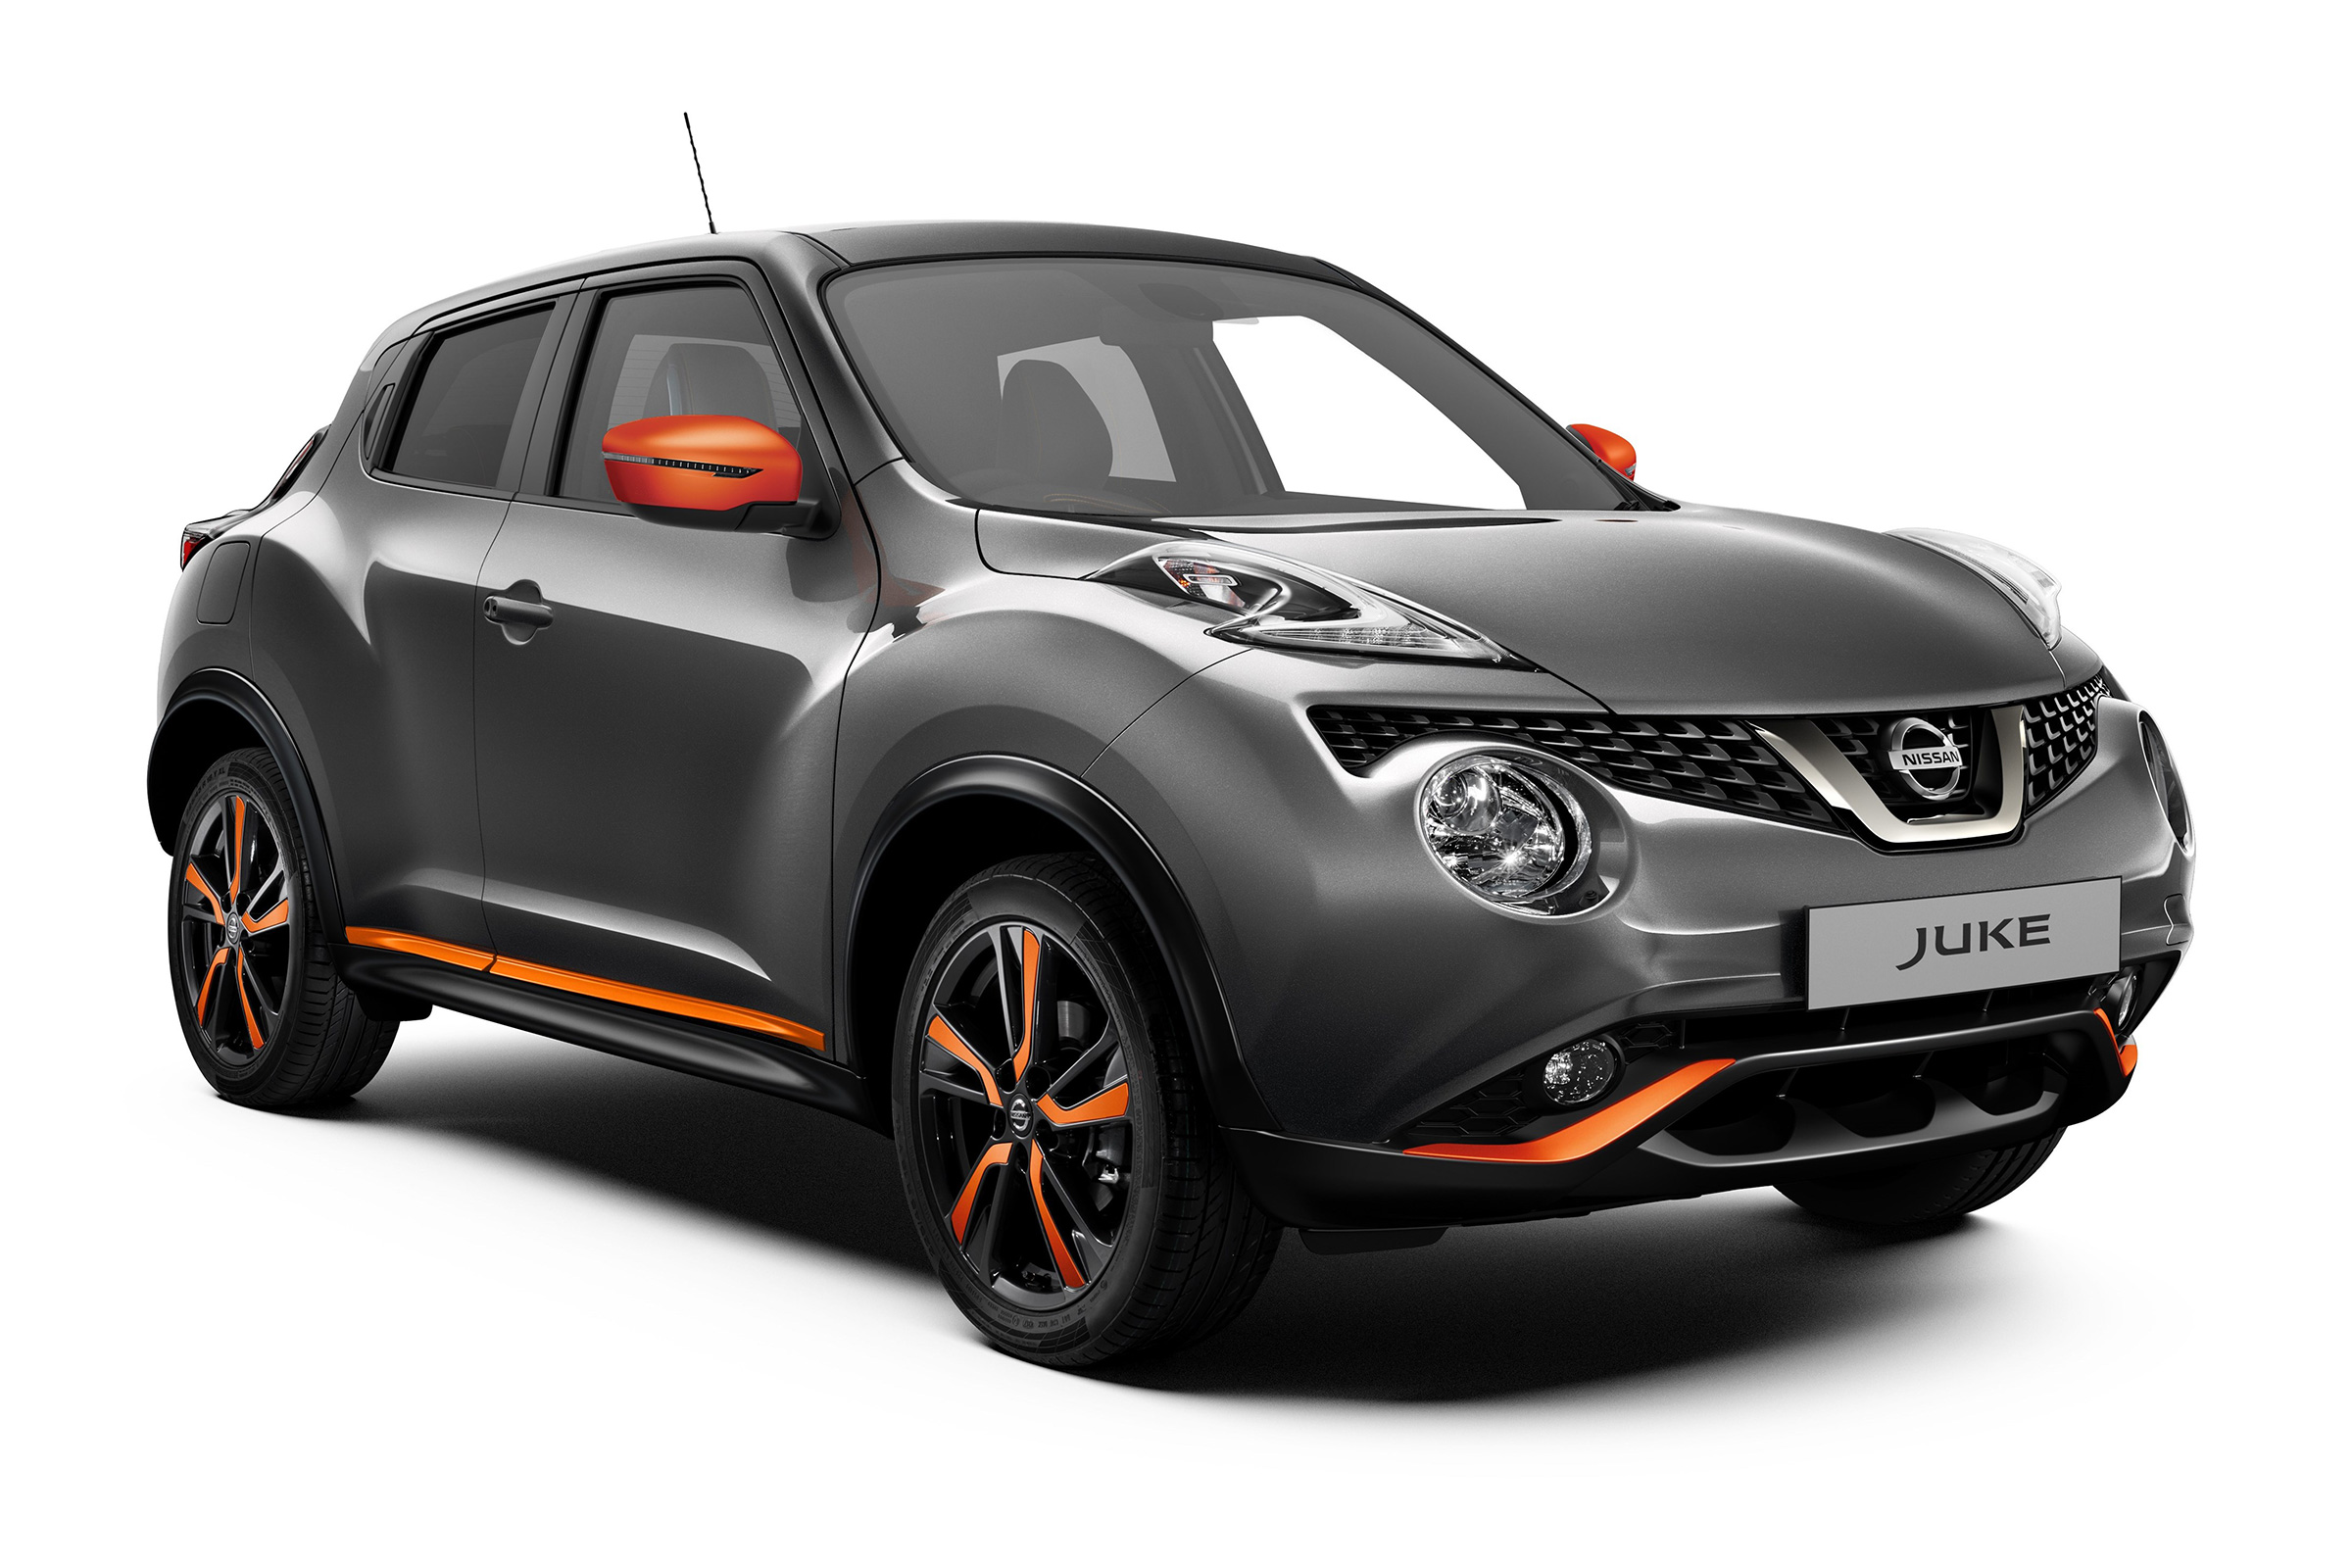 Nissan Juke updates aim to keep pace with crossover rivals